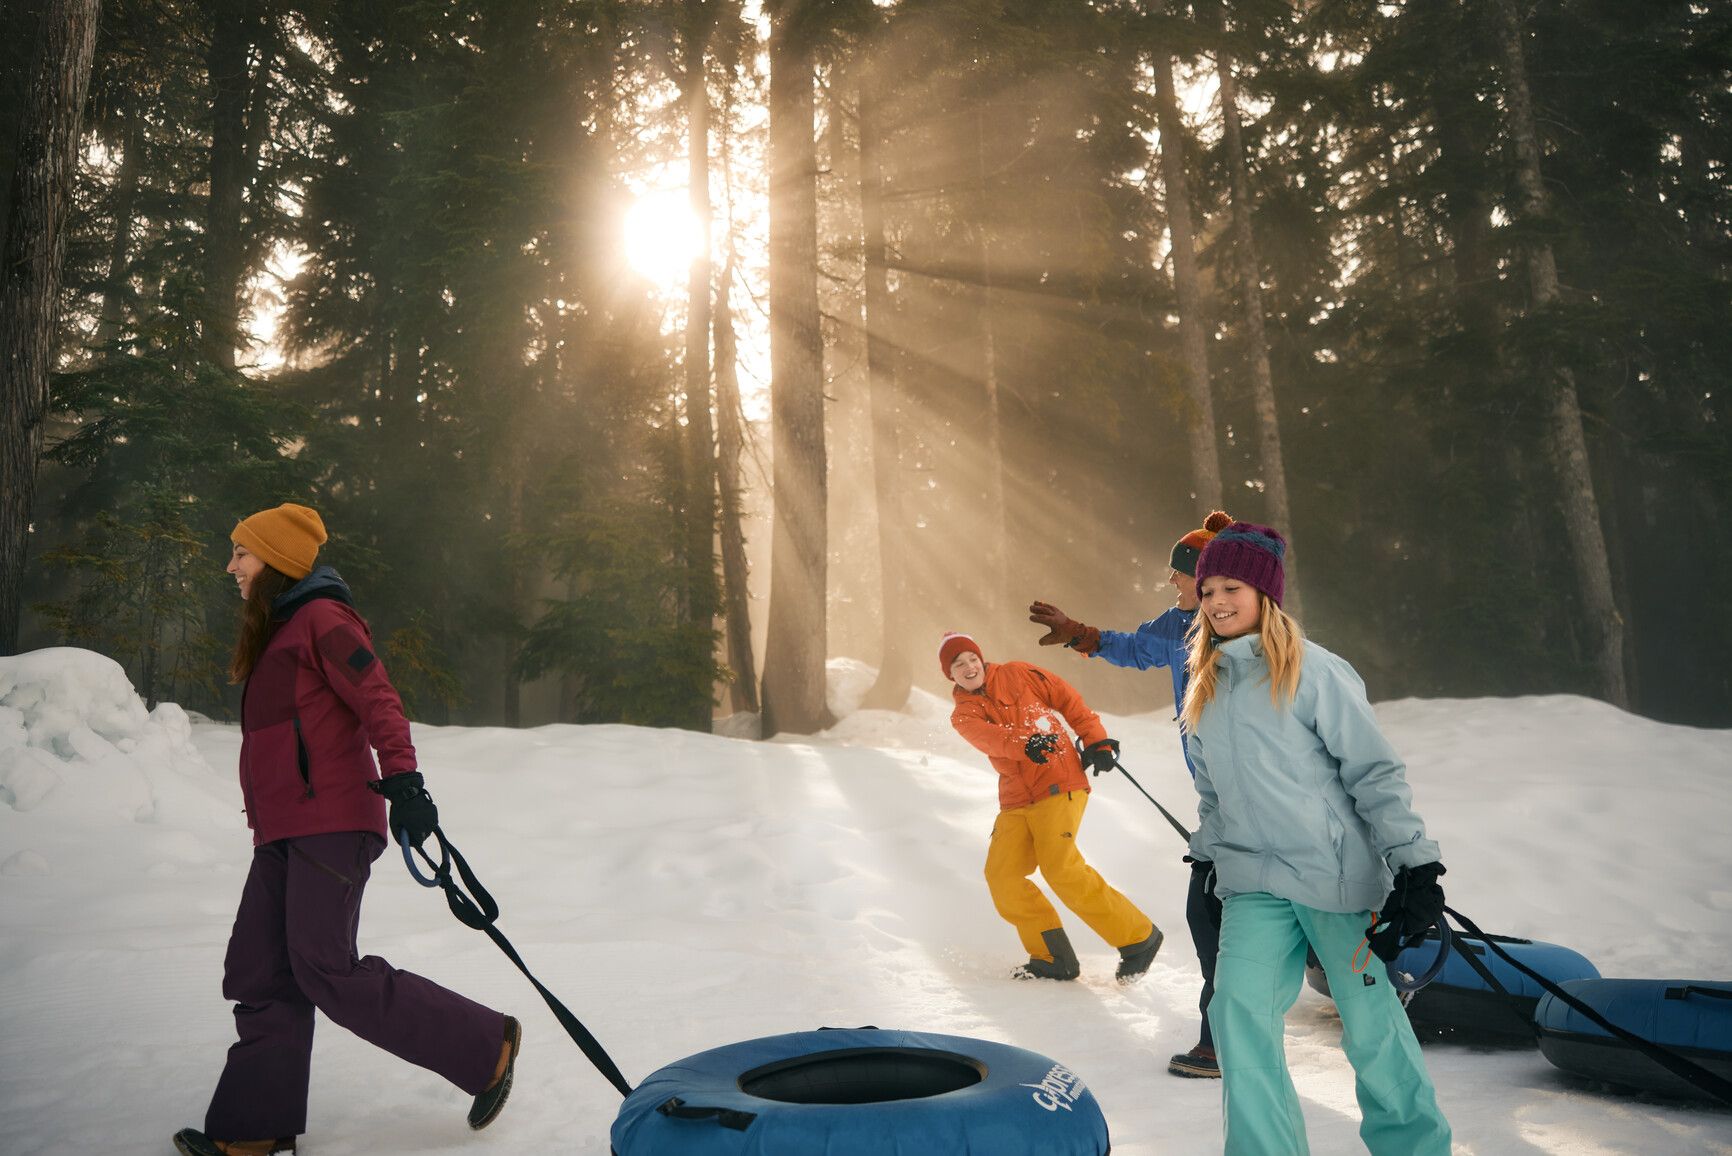 A family pulling tubes over the snow on their way to go tubing down the mountain in Cypress Park. Credit: &nbsp;Destination Vancouver/Kindred and Scout